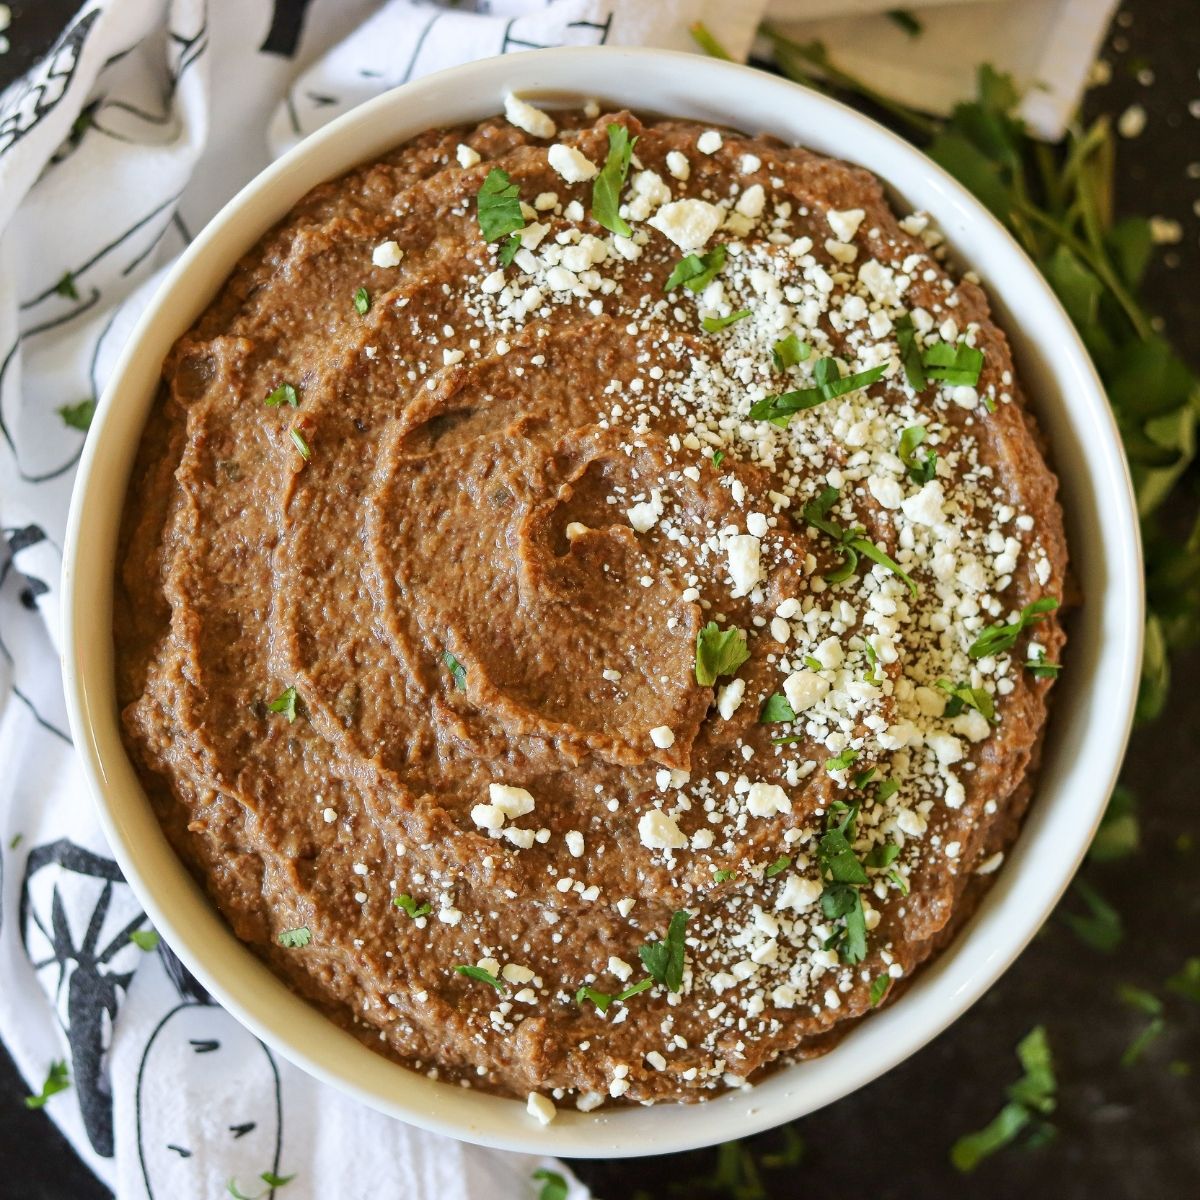 Are Refried Beans Keto